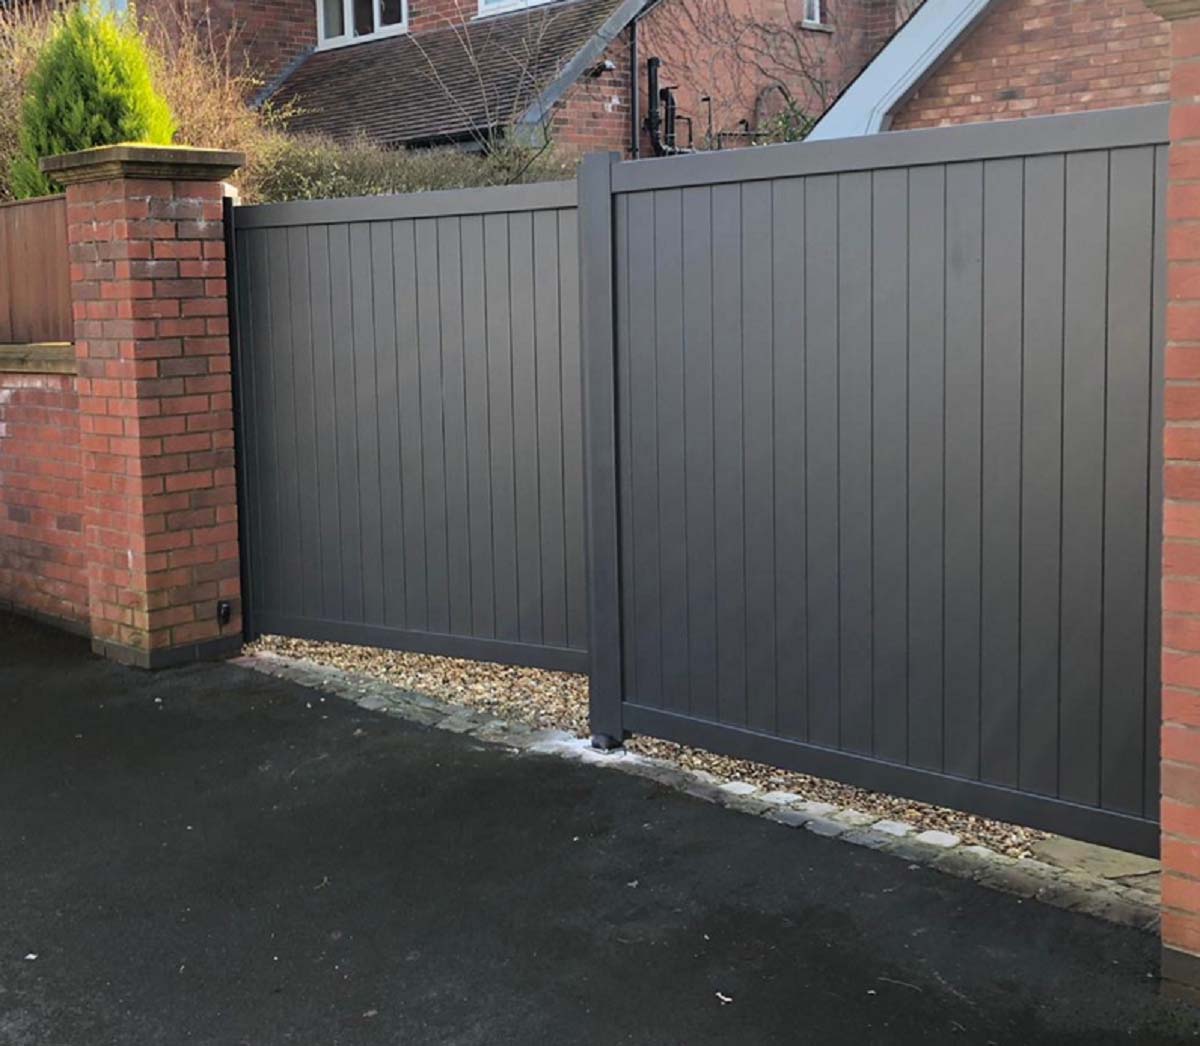 Readymade Anthracite Grey Aluminium Vertical Double Swing Gate - 3250mm Width